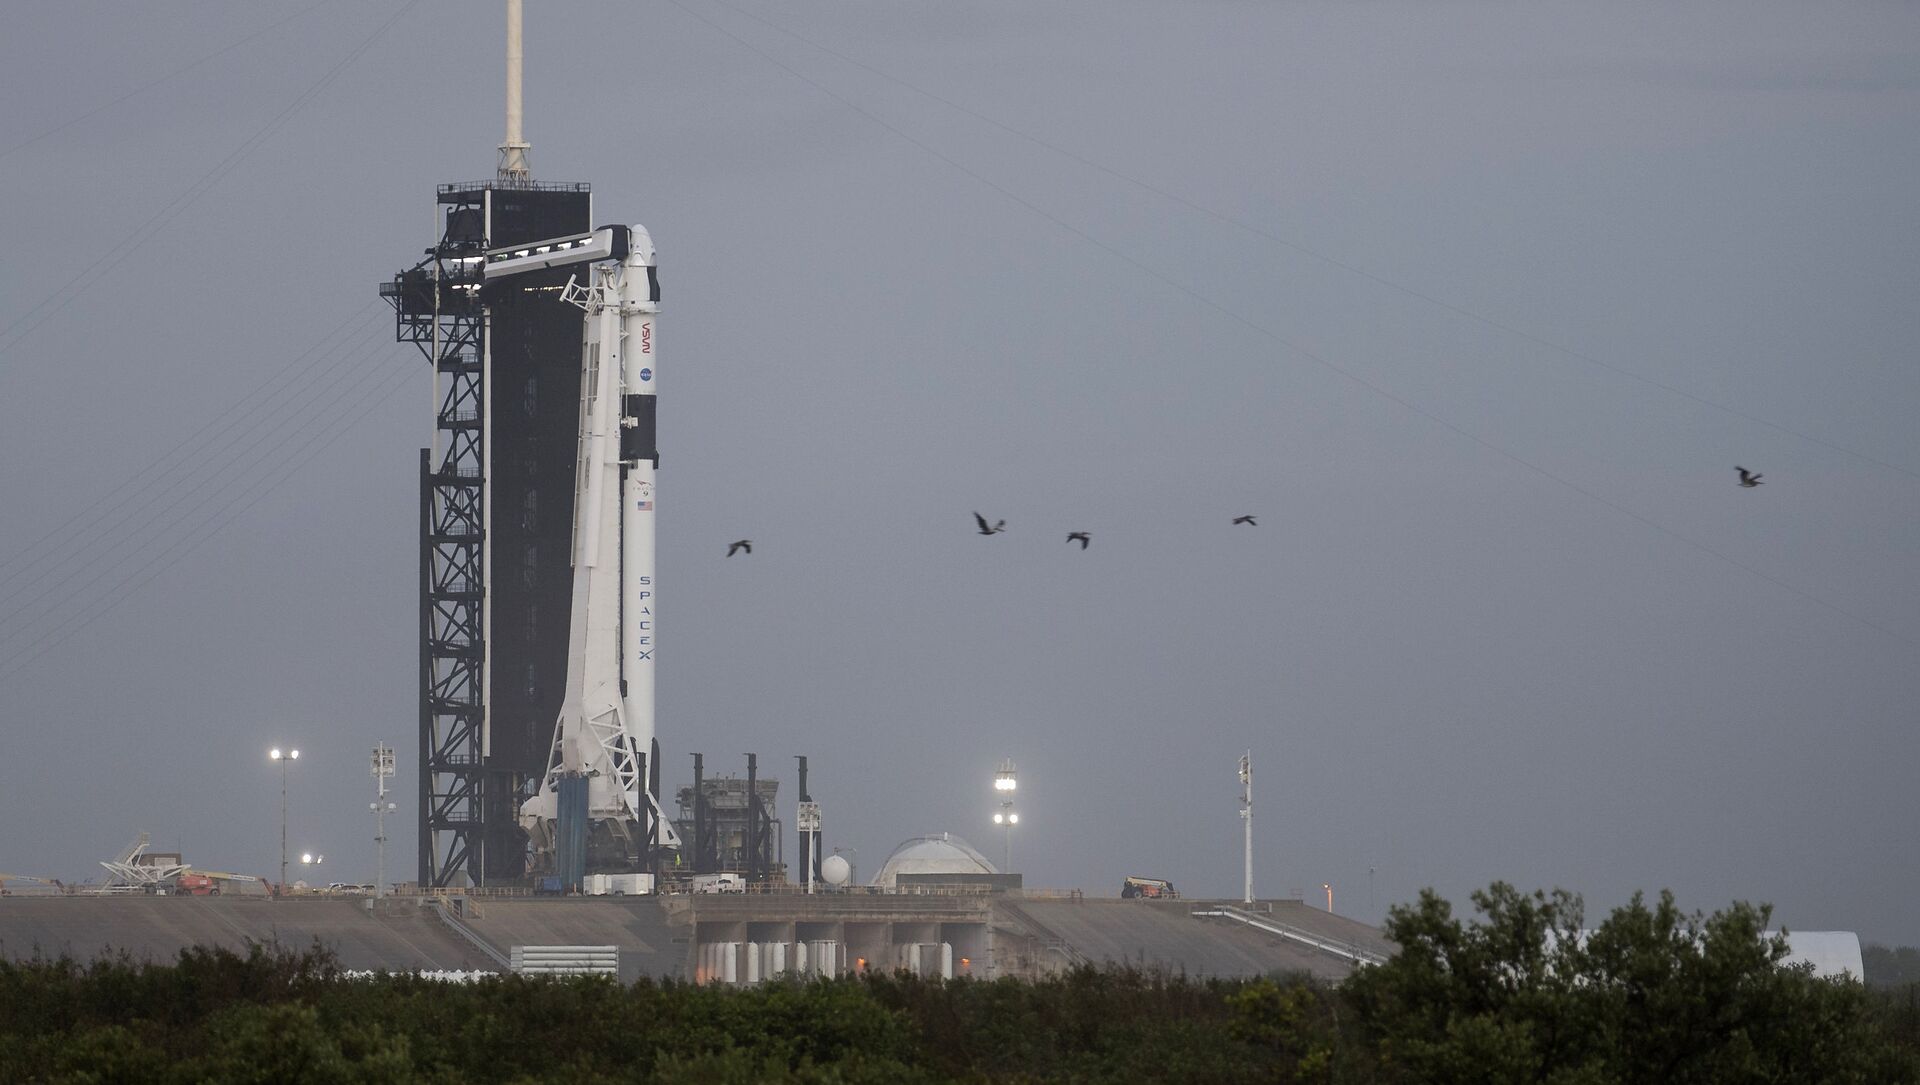 A SpaceX Falcon 9 rocket with the company's Crew Dragon spacecraft onboard is seen on the launch pad at Launch Complex 39A after being rolled out overnight as preparations continue for the Crew-1 mission, Tuesday, Nov. 10, 2020, at NASA's Kennedy Space Center in Florida - Sputnik International, 1920, 23.04.2021